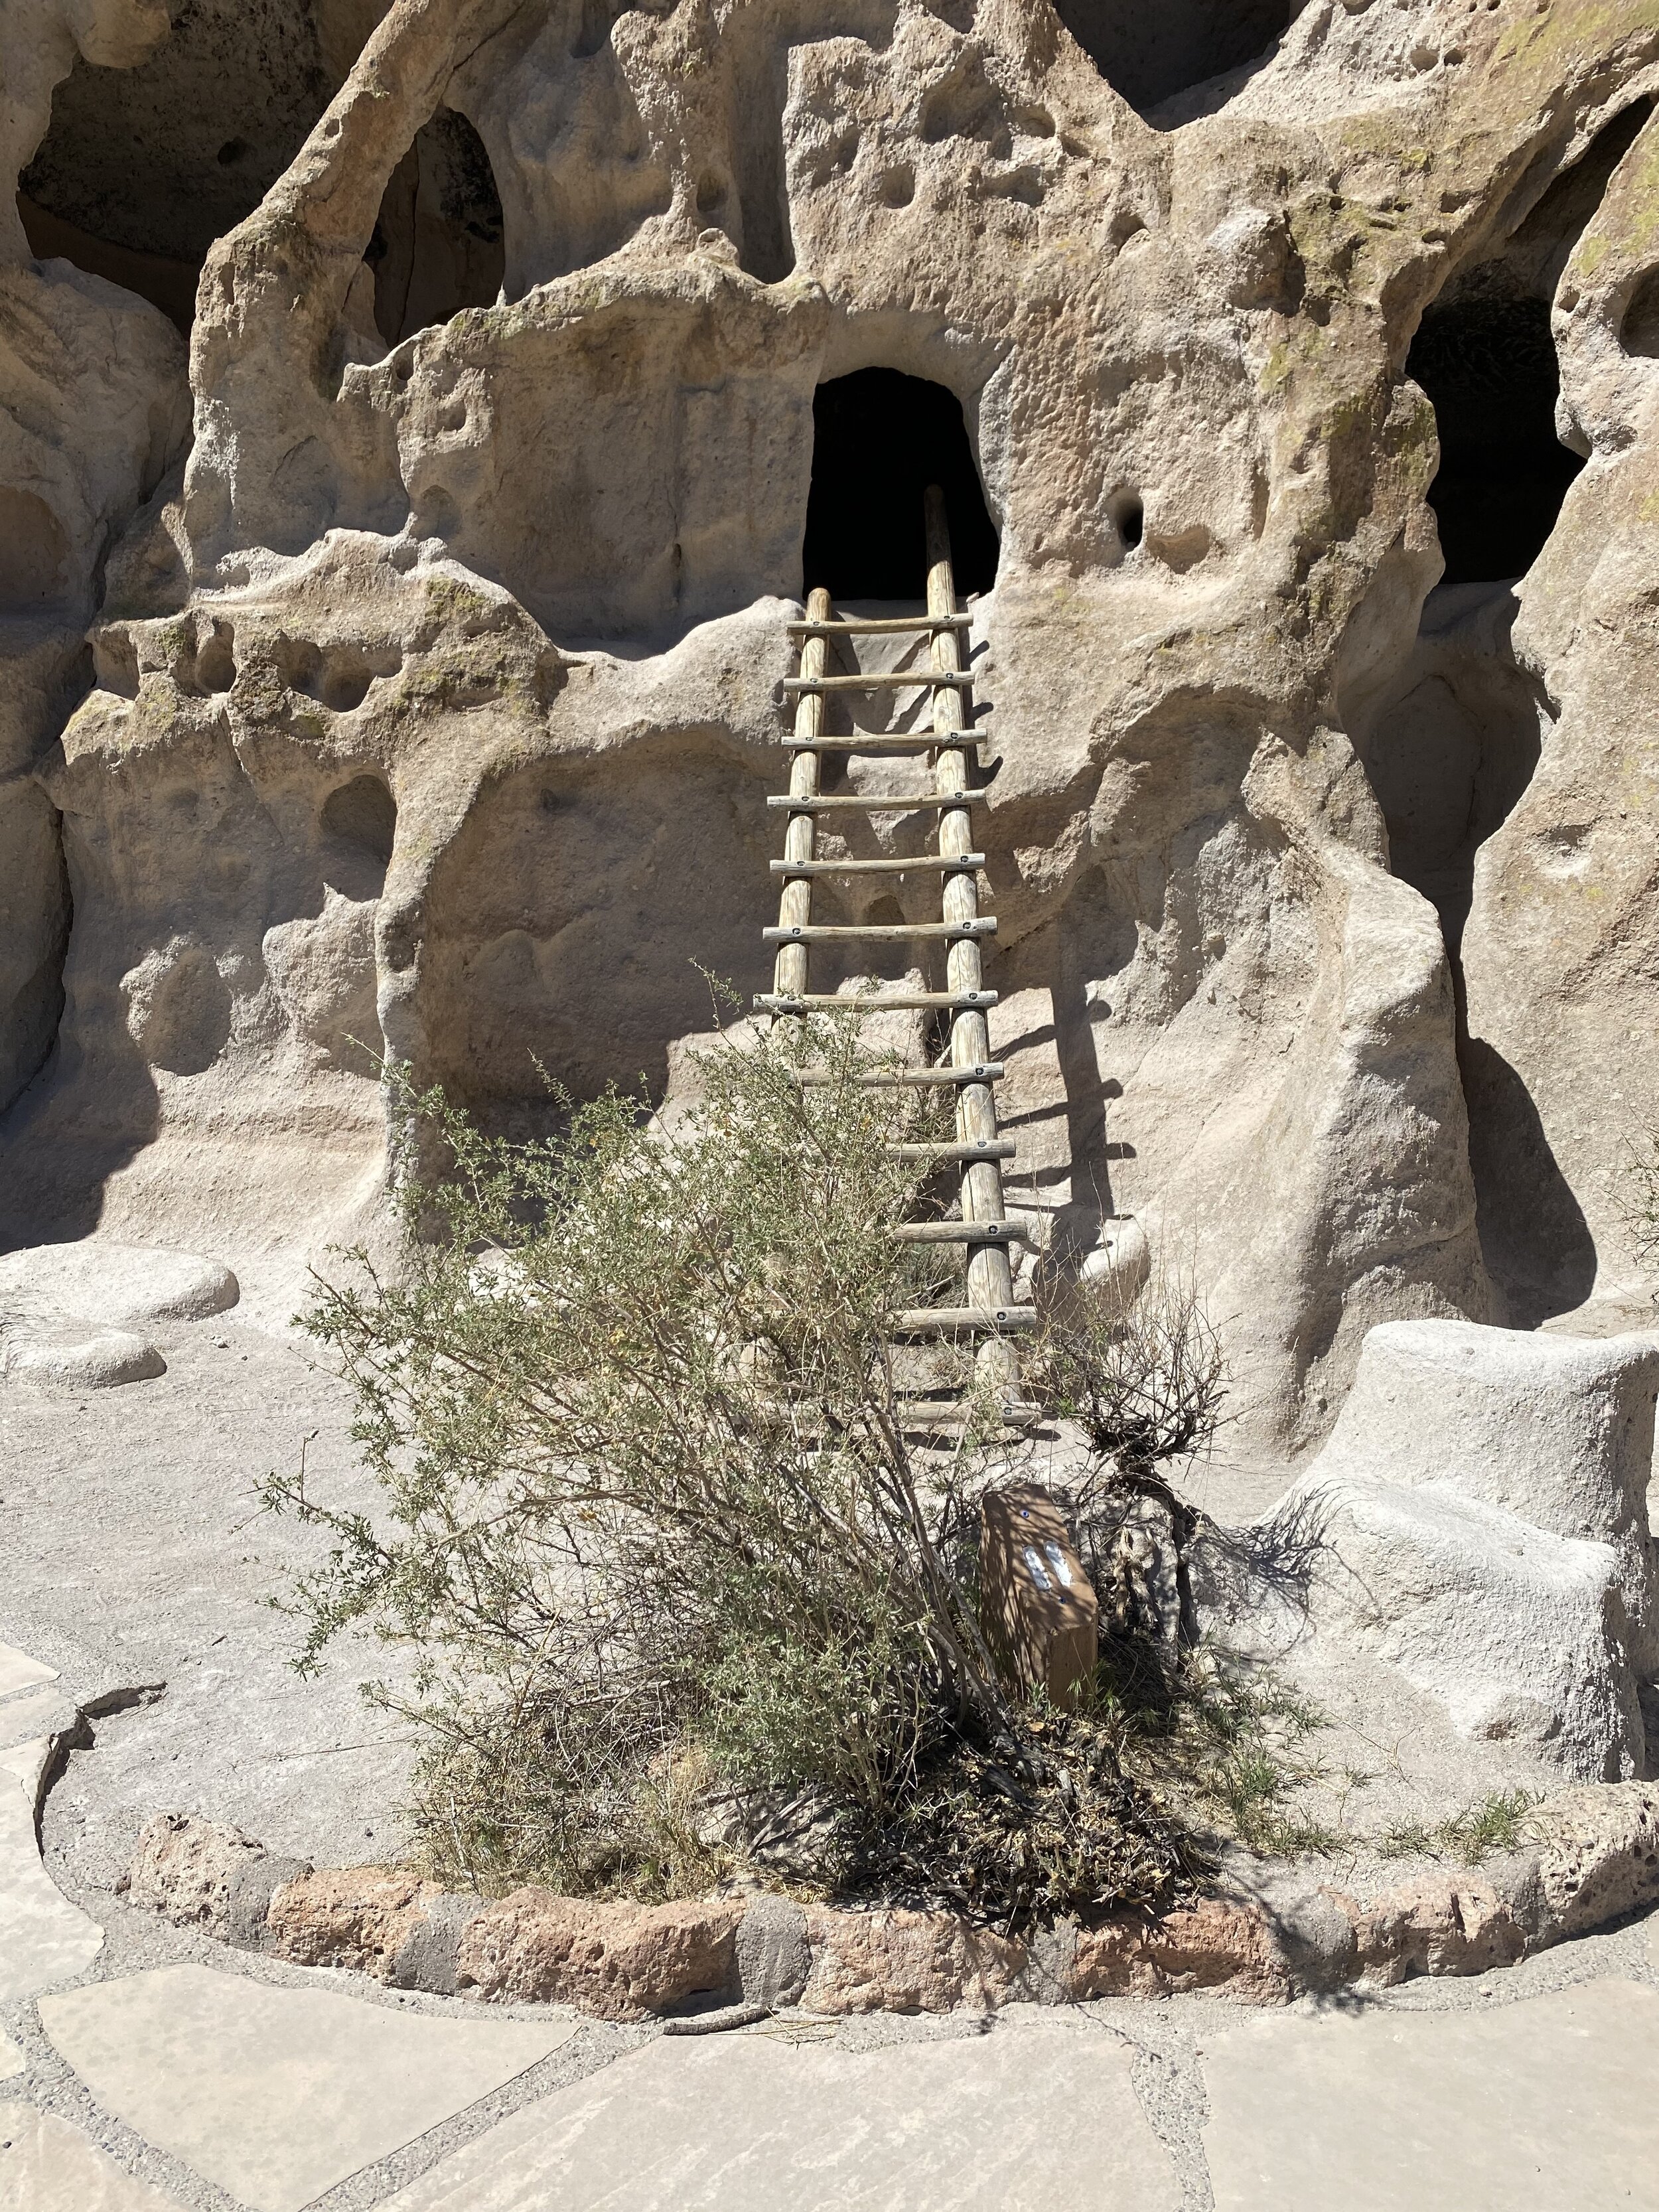 Ladder into a cliff dwelling at Bandelier National Monument